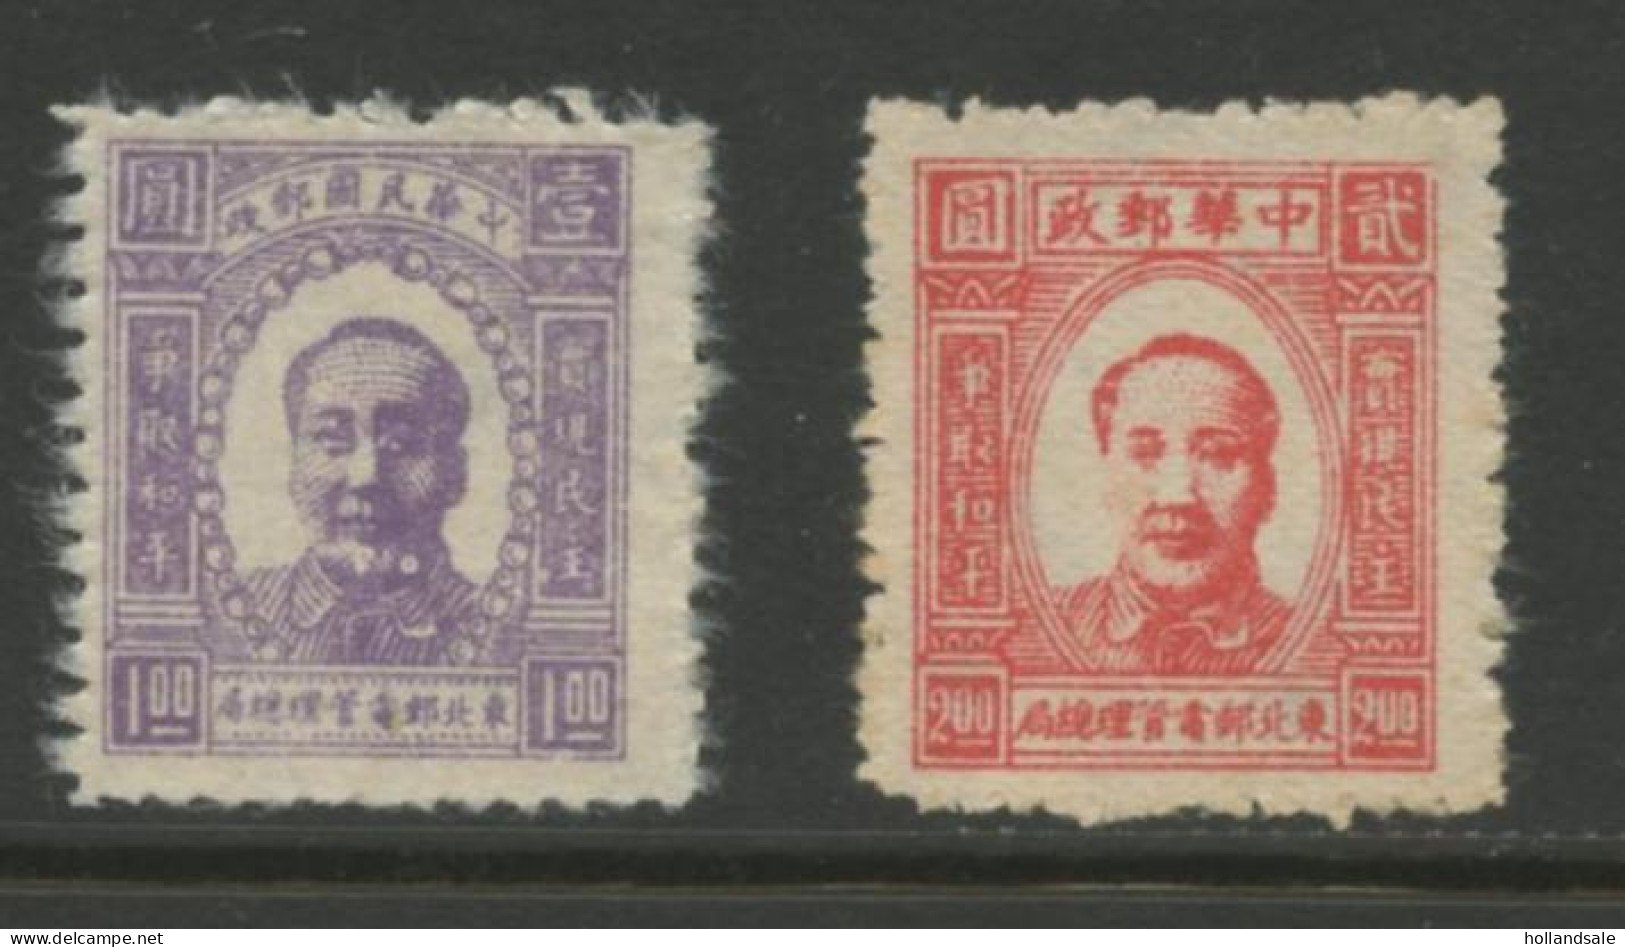 CHINA NORTH EAST - 1946 MICHEL # 1 And # 2. Both Unused. - Nordostchina 1946-48